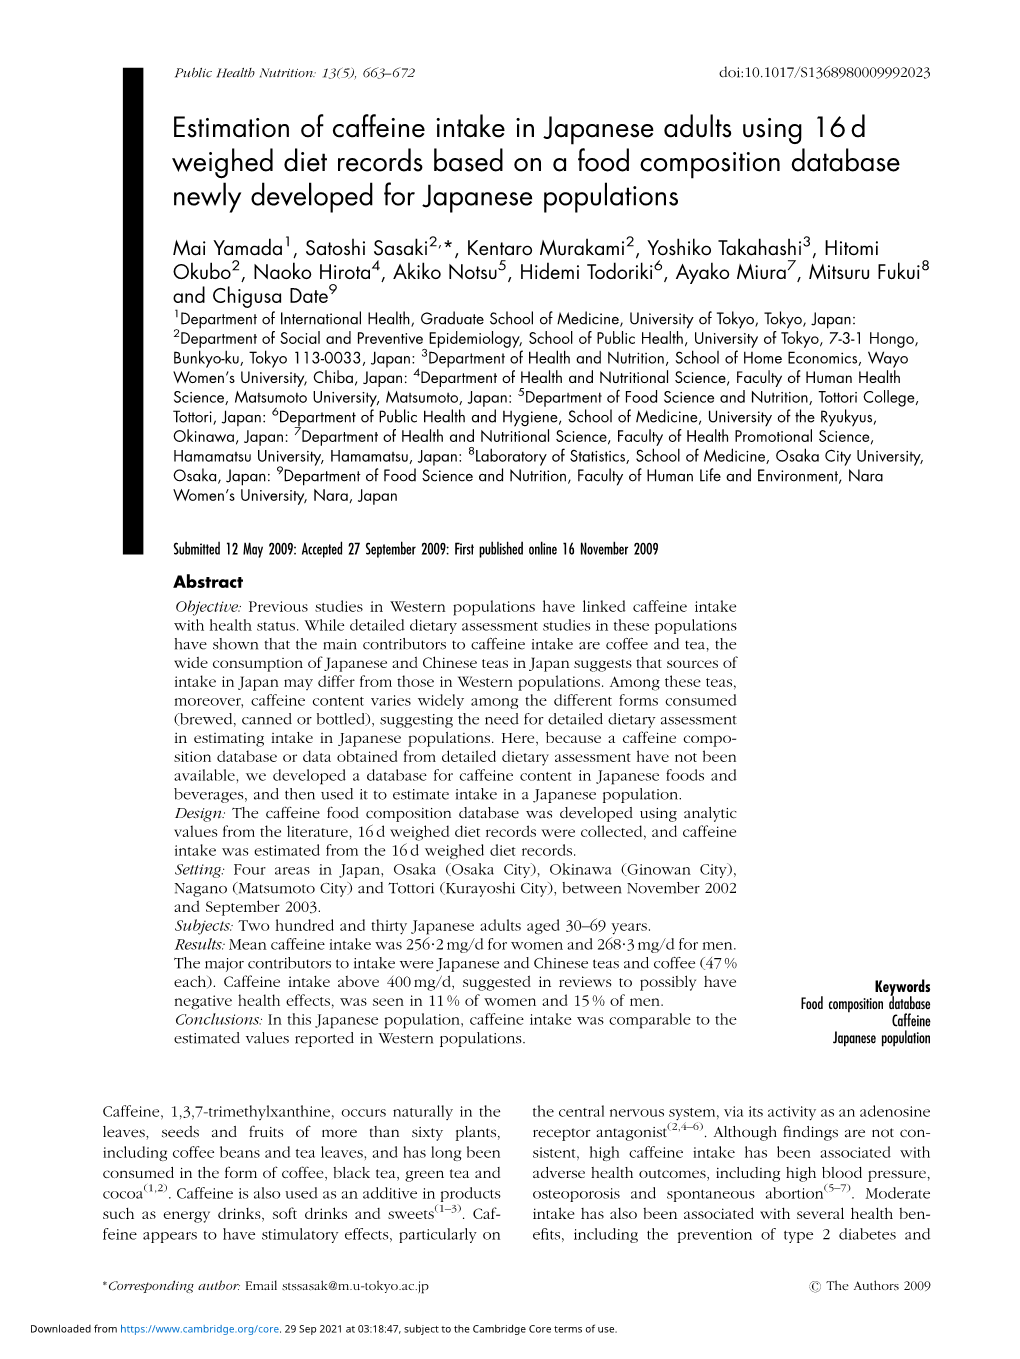 Estimation of Caffeine Intake in Japanese Adults Using 16 D Weighed Diet Records Based on a Food Composition Database Newly Developed for Japanese Populations